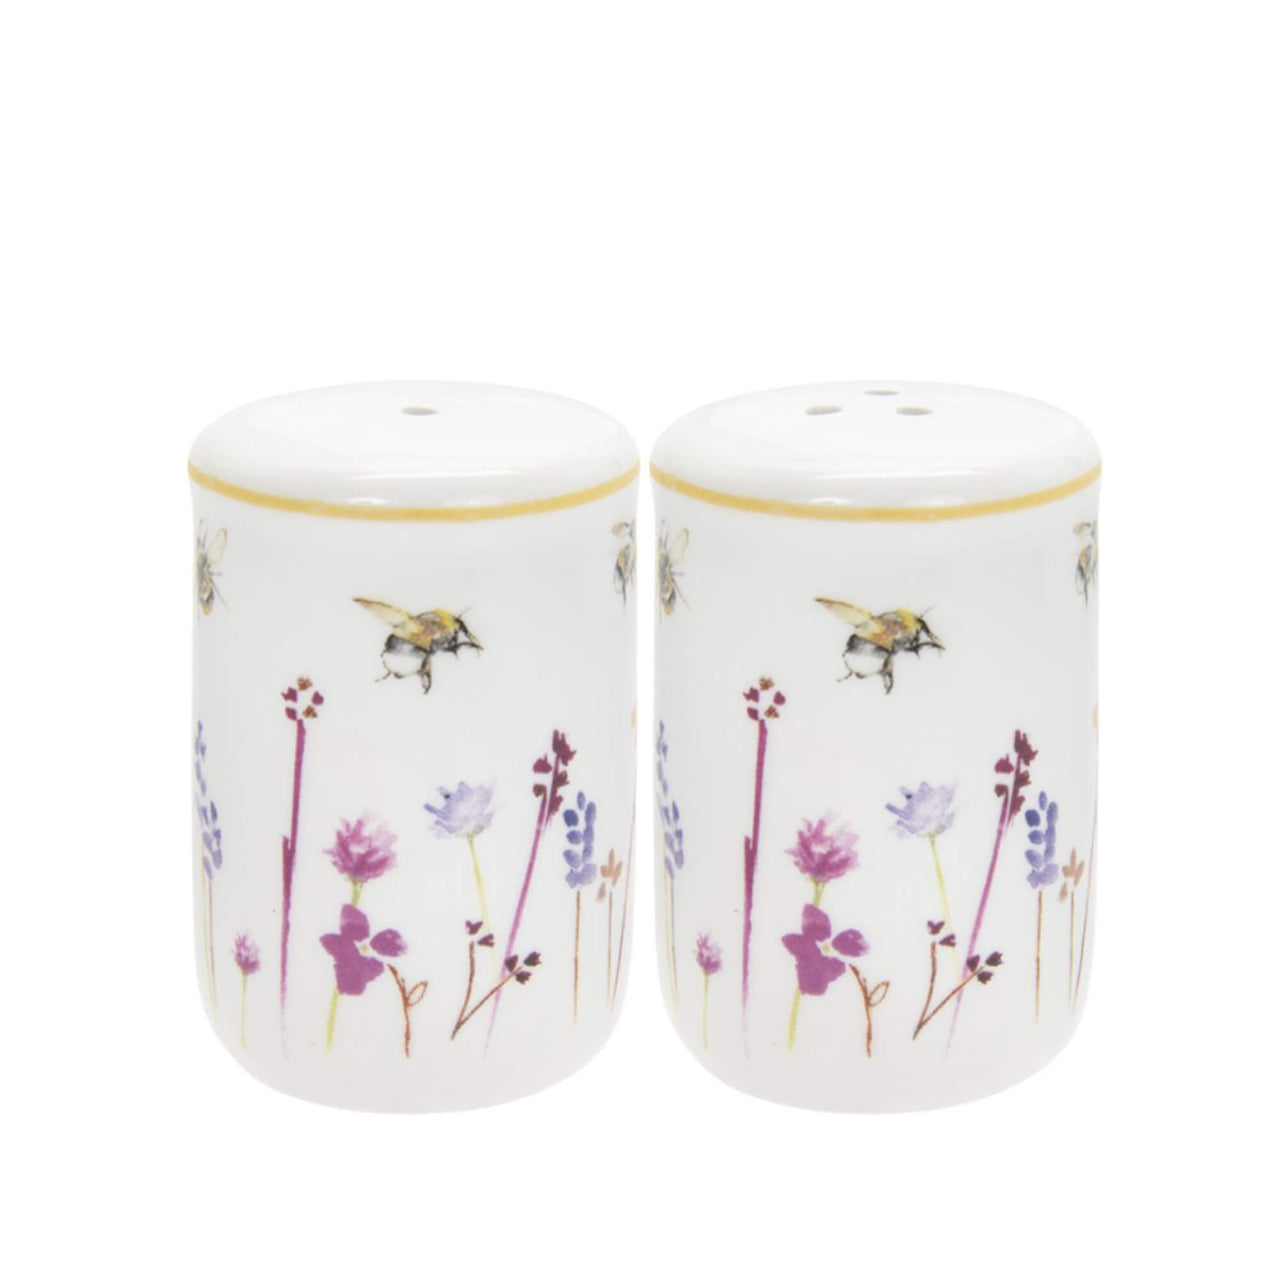 Busy Bee Salt and Pepper pots